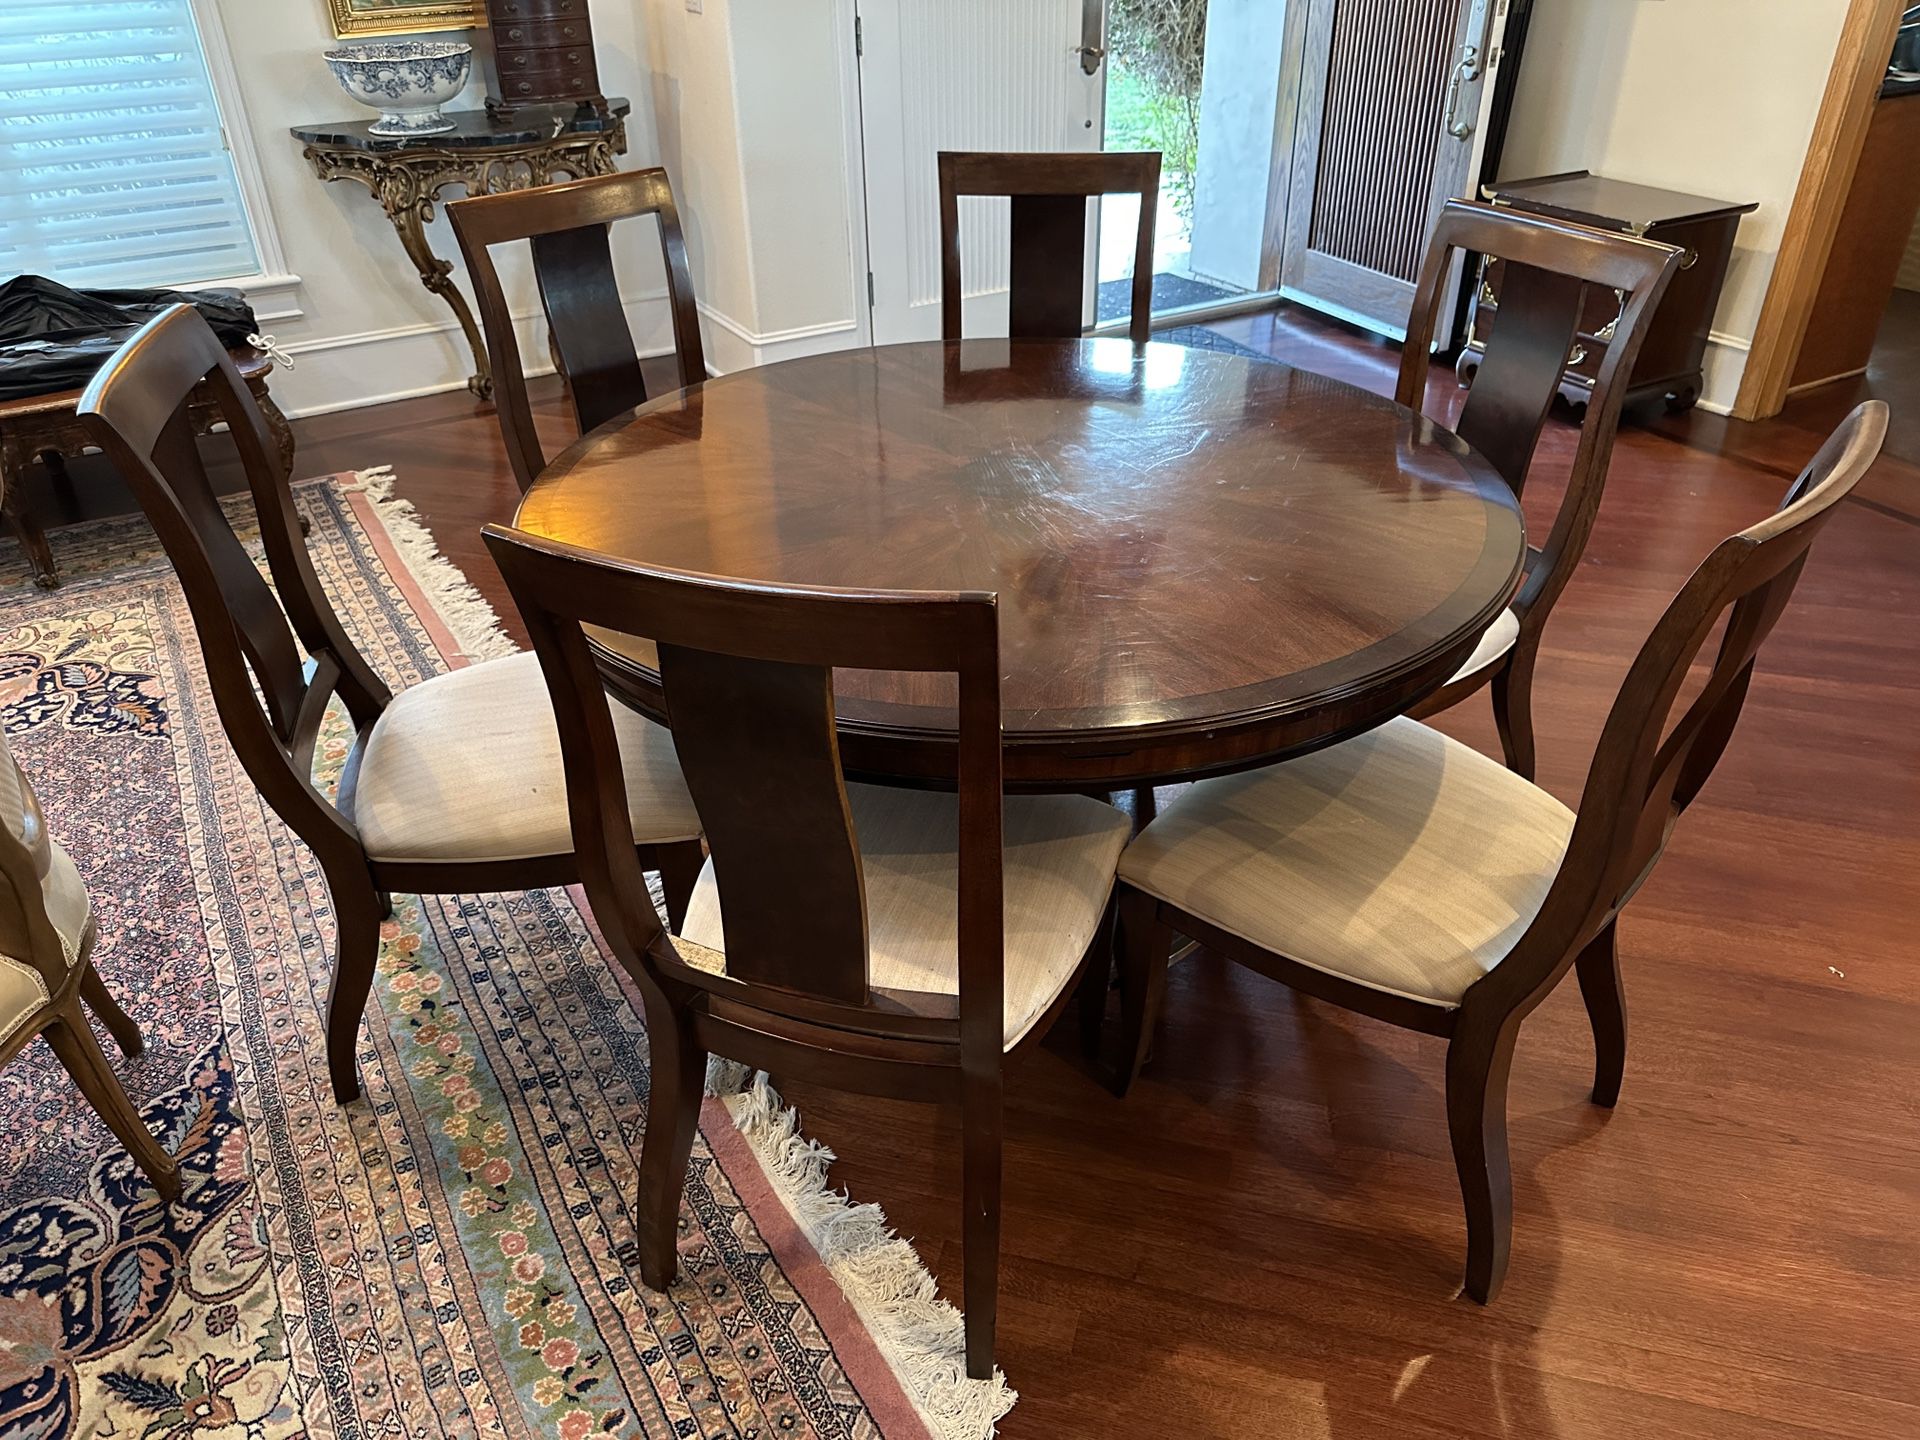 Round Dining Table with 6 Chairs and leaves